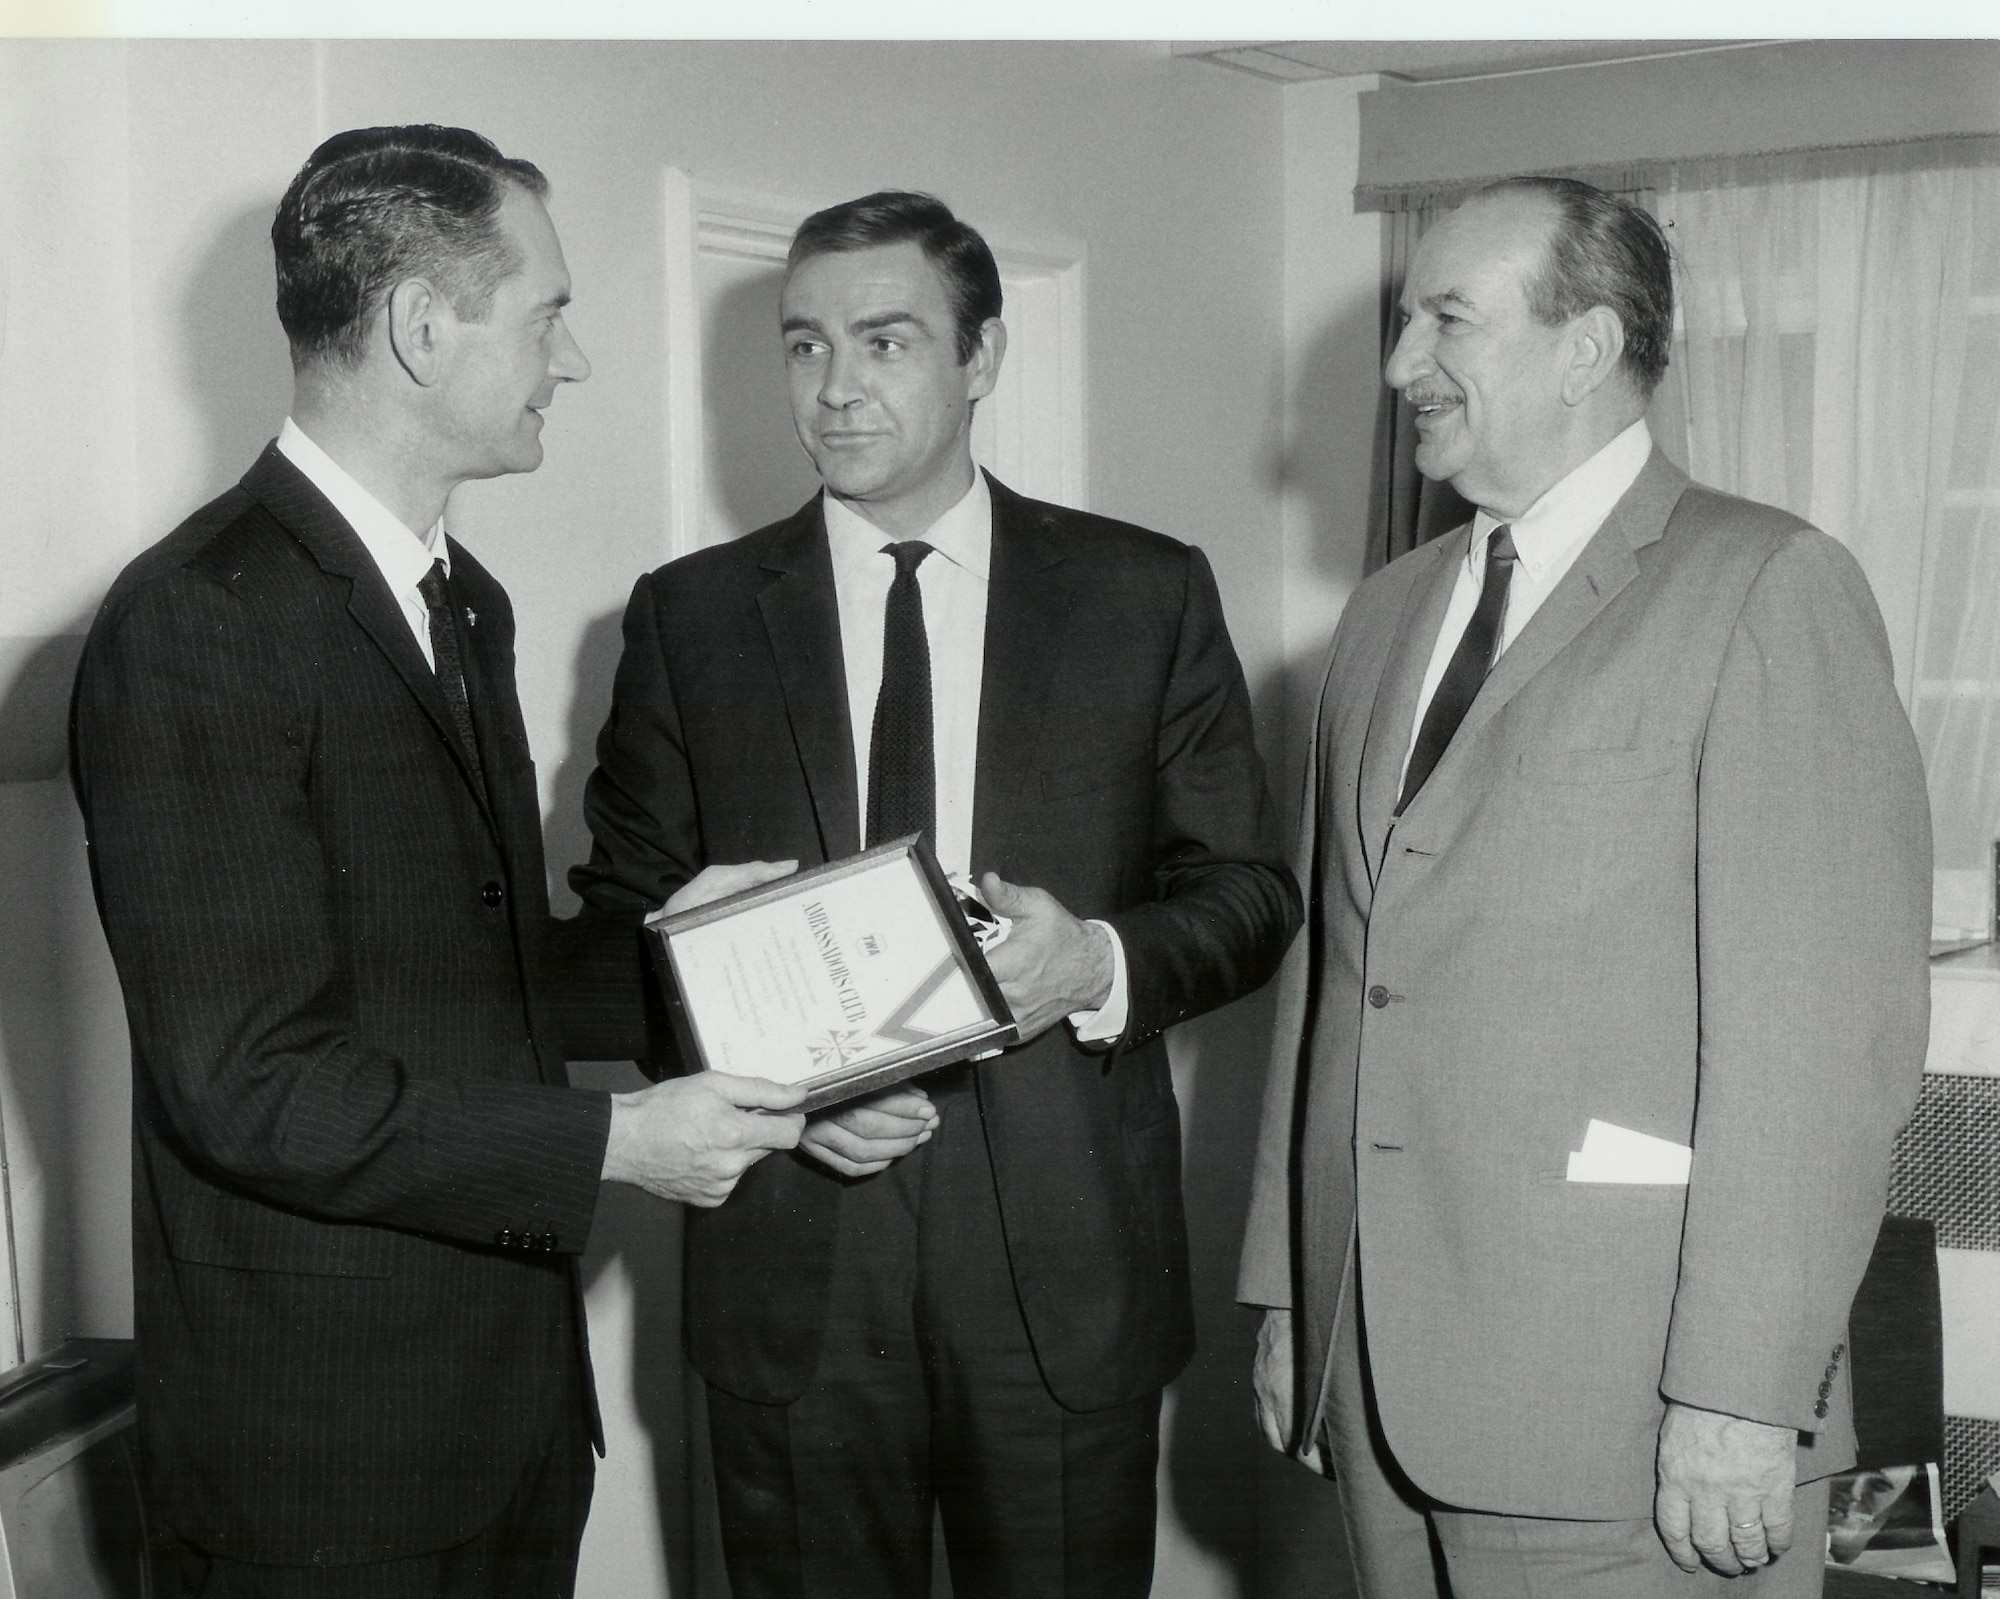 Sean Connery is welcomed to the TWA Ambassadors Club during the production of “Thunderball.” Retired Lieutenant Colonel Charles Russhon, military advisor to the James Bond films in the ‘60s and ‘70s and friend of Sean Connery’s, is to his right. (Photo courtesy of Christian Russhon)